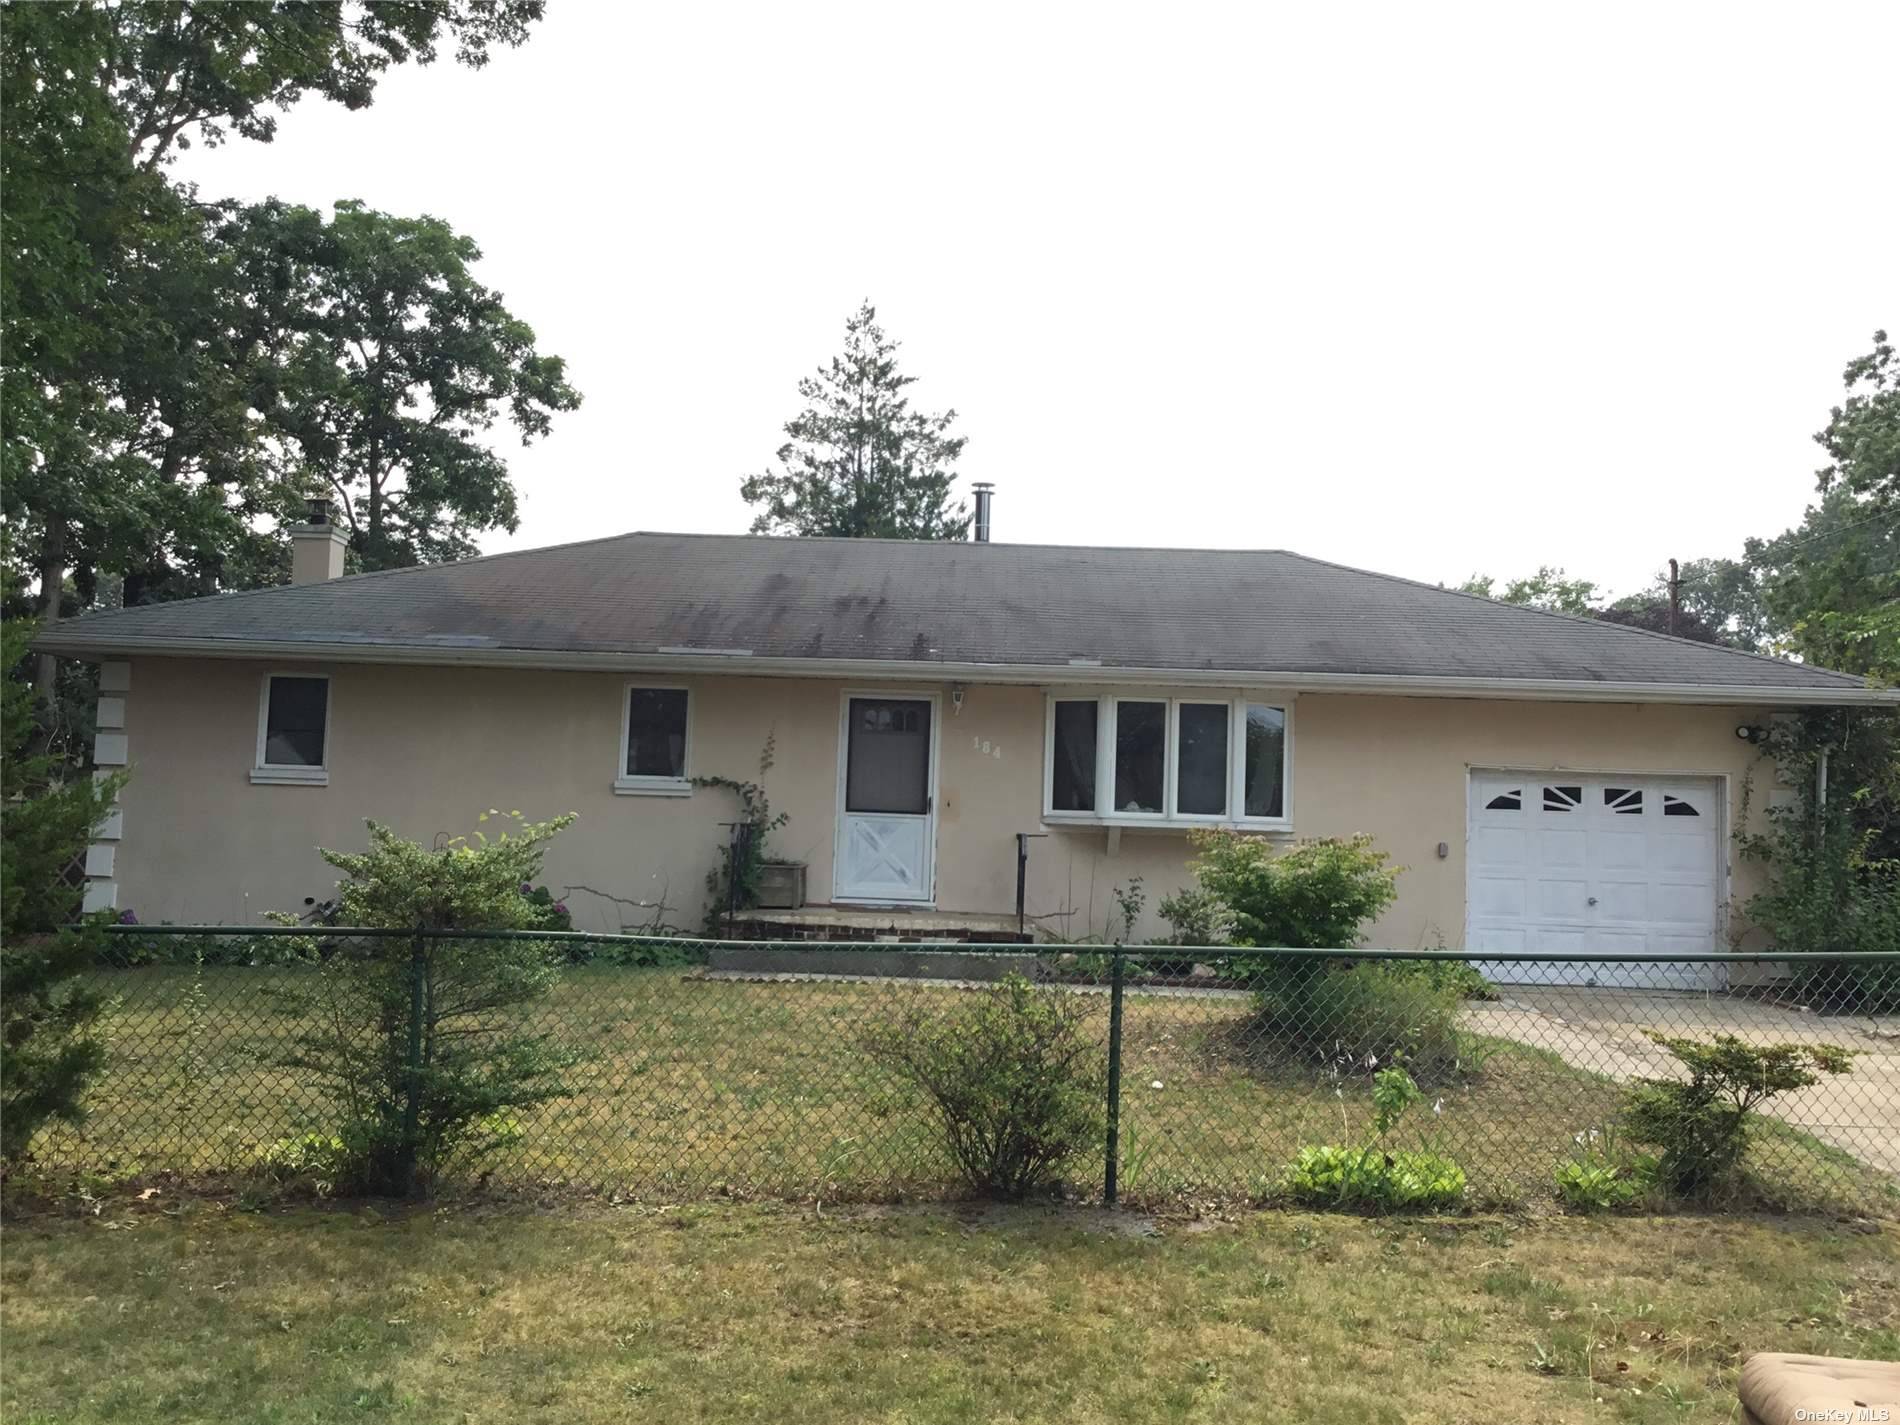 Spacious 3 Bd 1bath ranch with full unfinished basement, garage and in ground pool 16x32.